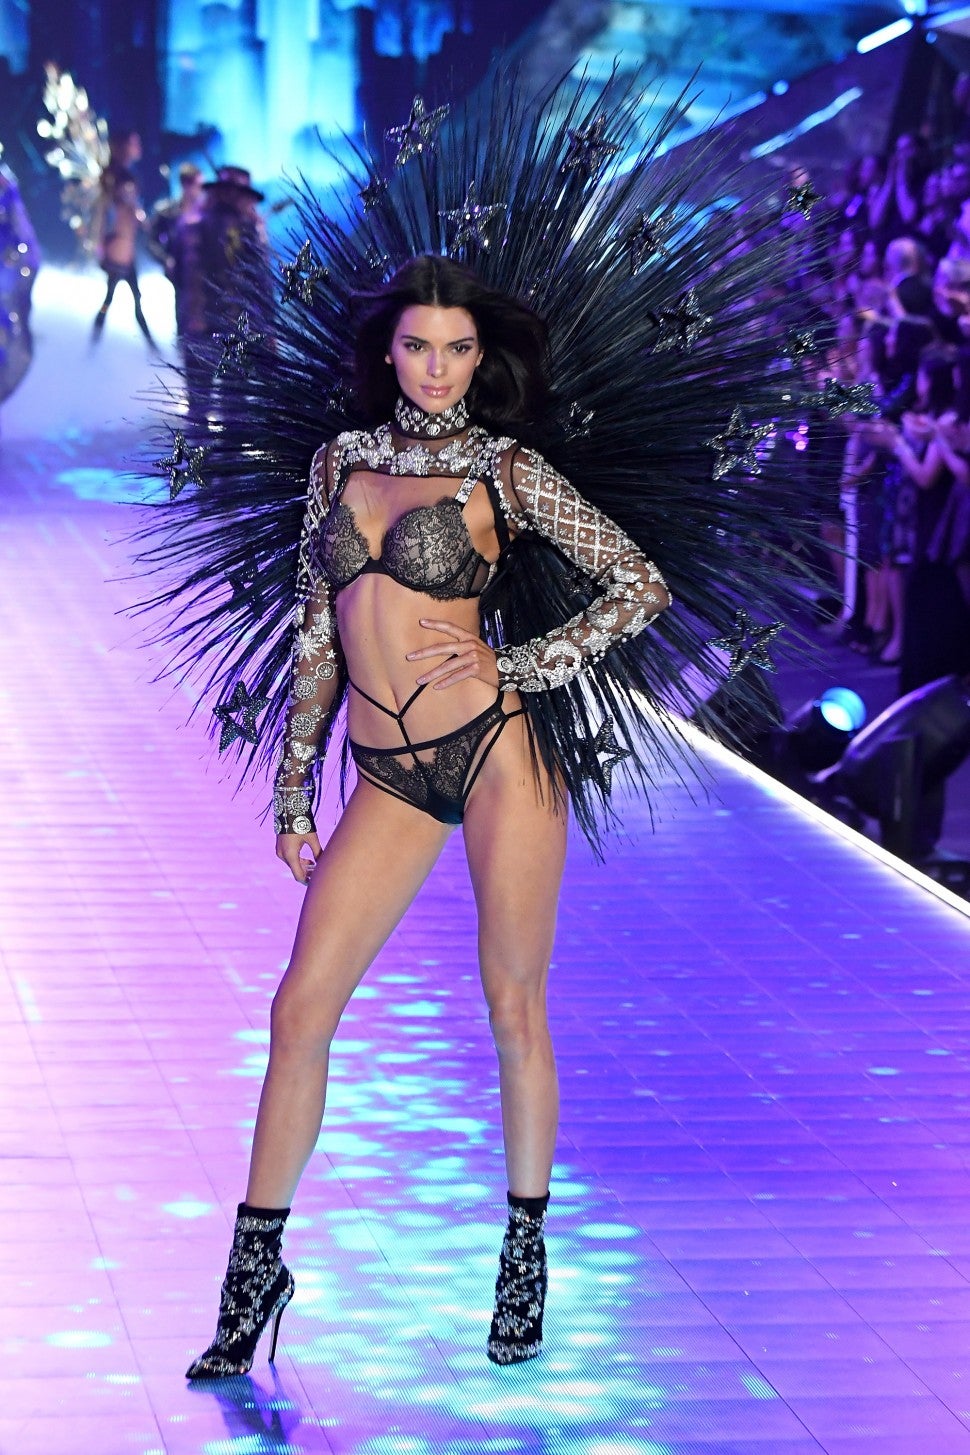 kendall_jenner_gettyimages-1059371568.jpg